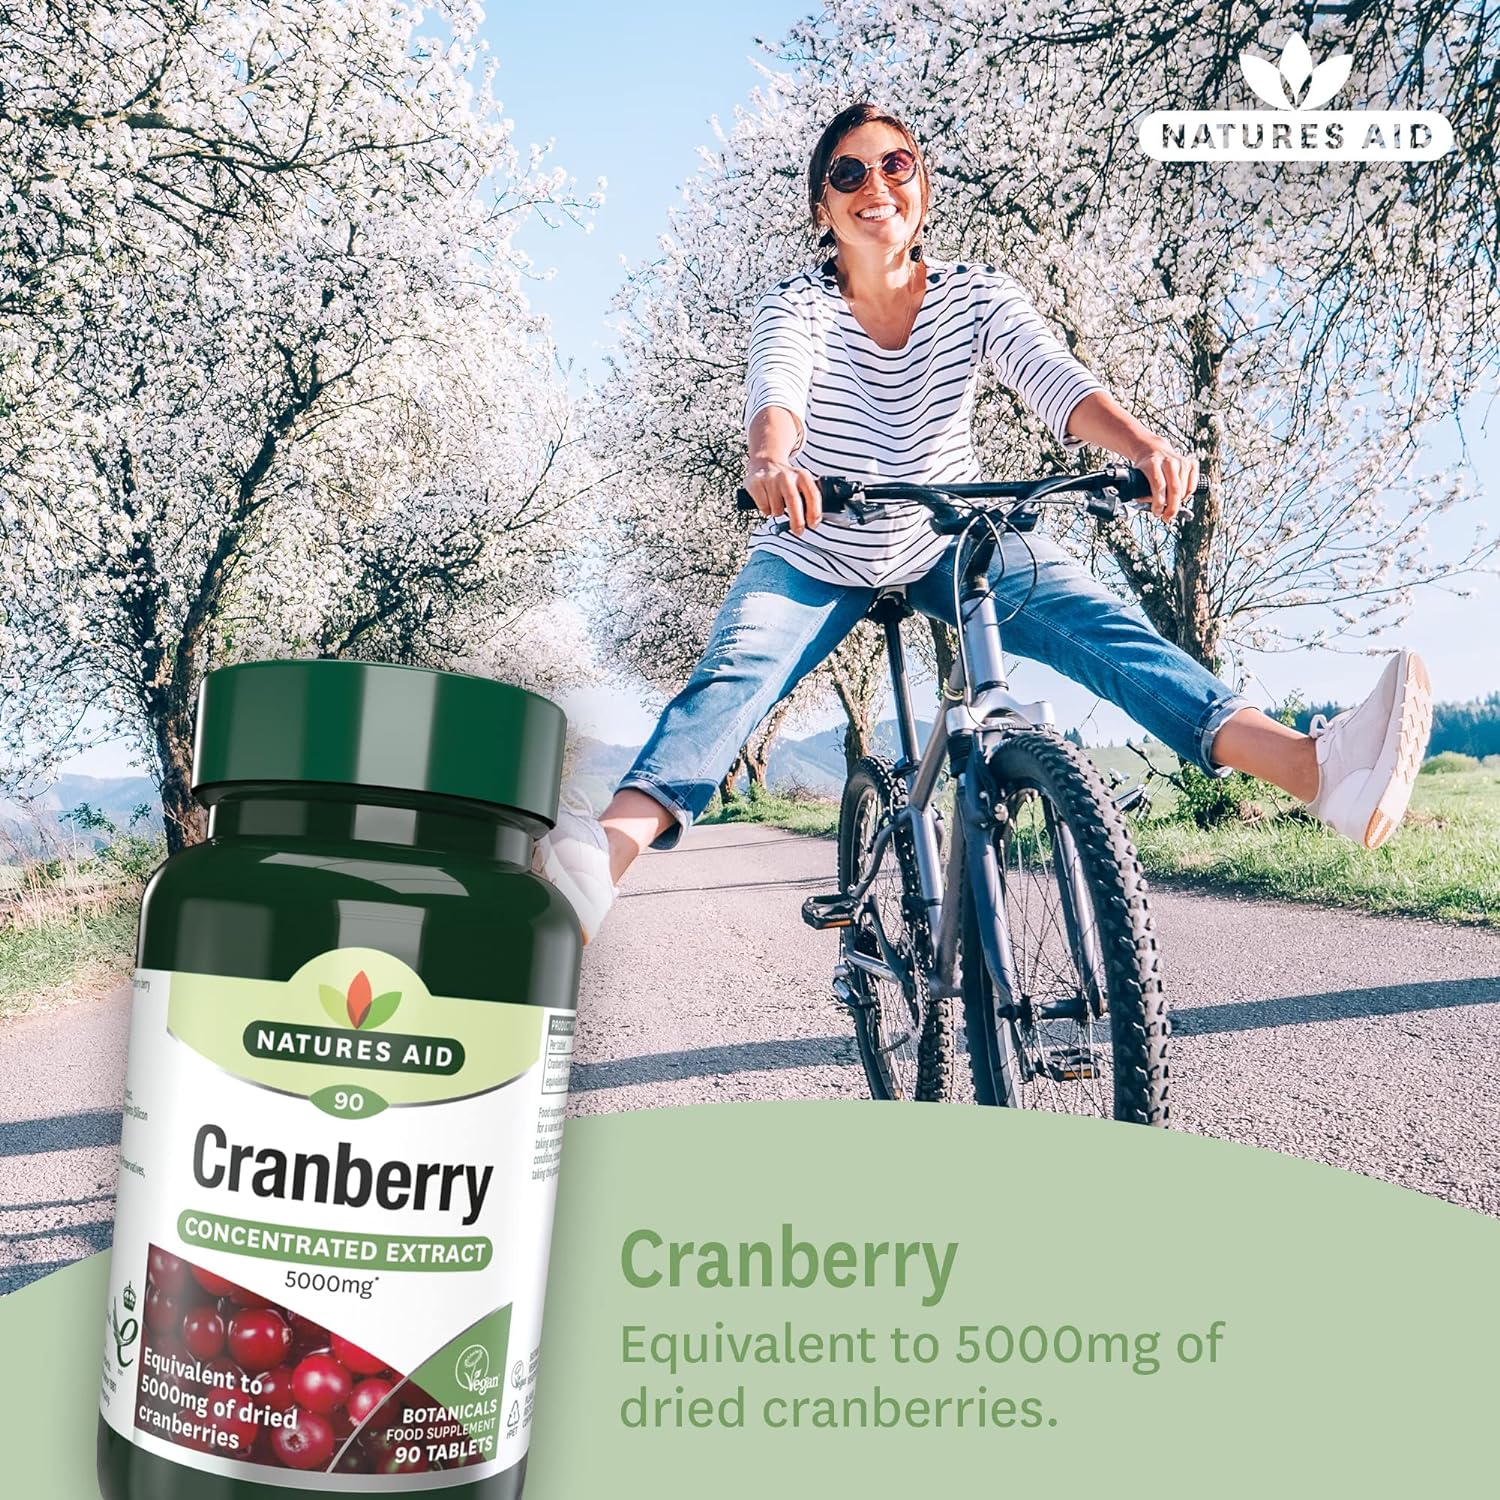 Natures Aid Cranberry 5000mg